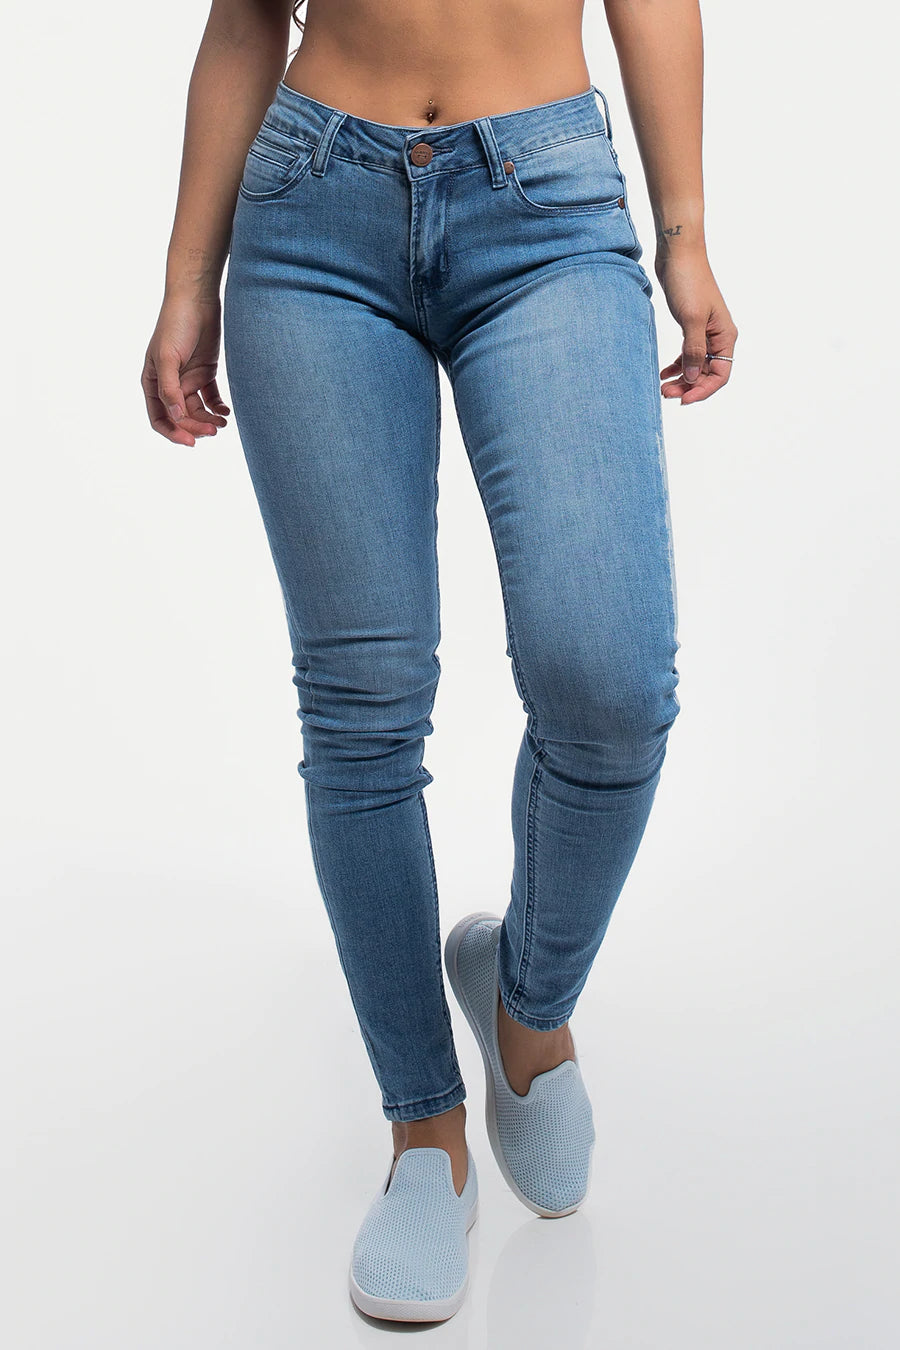 http://barbellapparel.com/cdn/shop/products/barbell-womens-slim-athletic-fit-jean-front-in-focus-light-wash.webp?v=1650322626